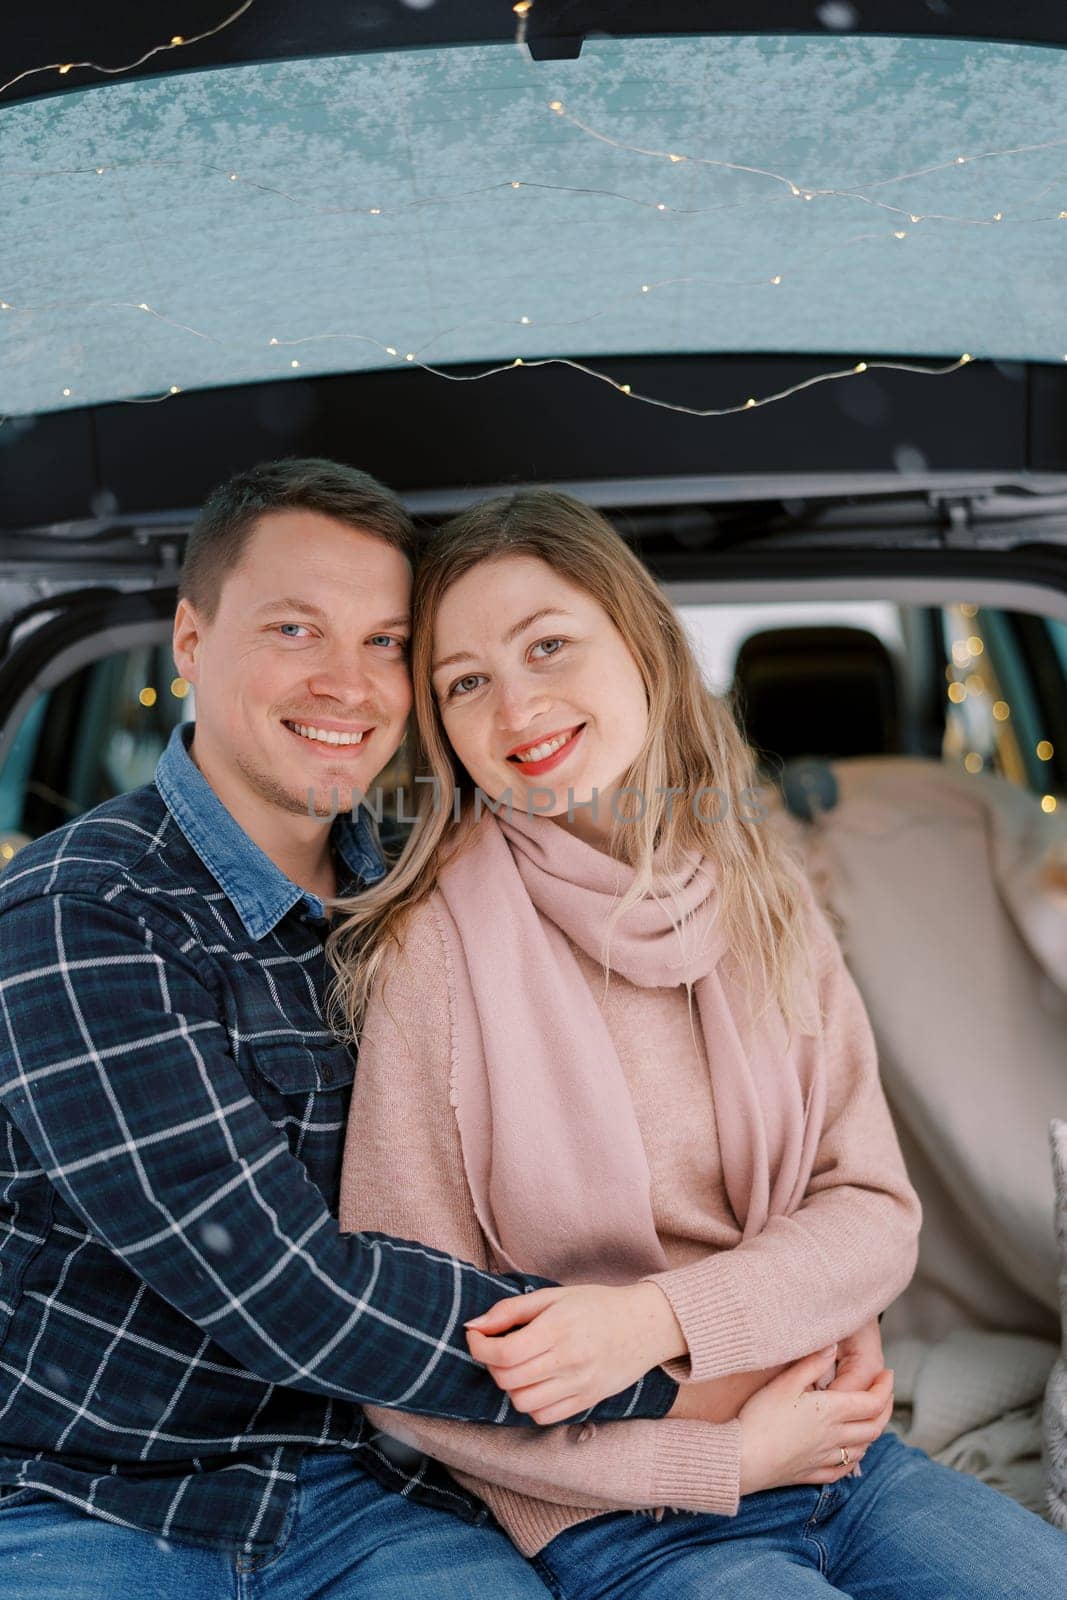 Hugging smiling couple sitting in car trunk on bedspreads by Nadtochiy